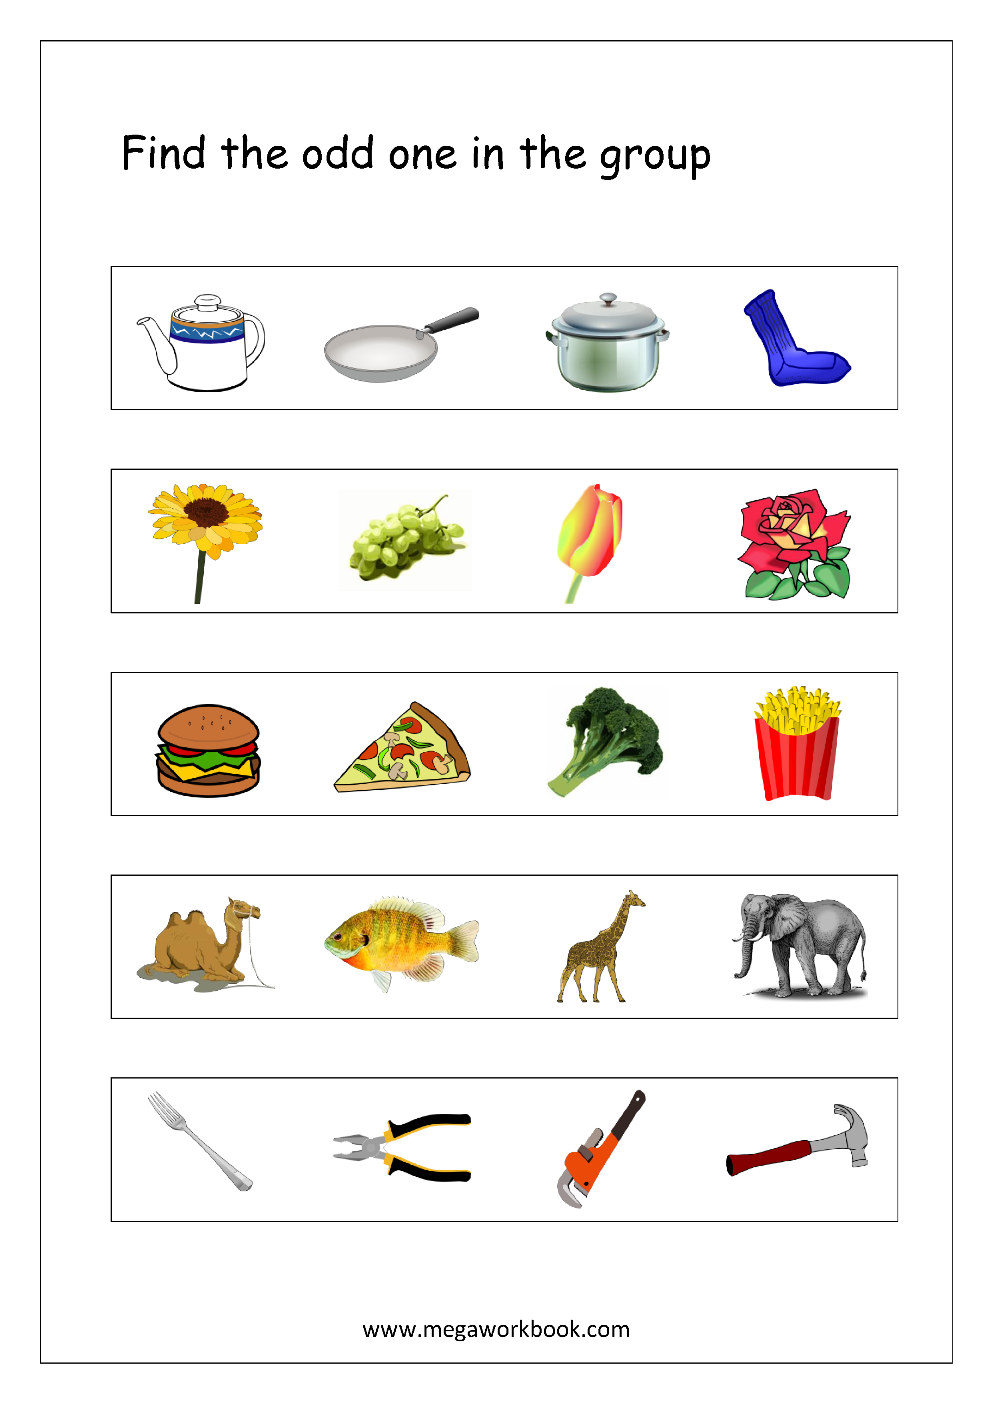 Free Printable Odd One Out Worksheets - Logical Thinking